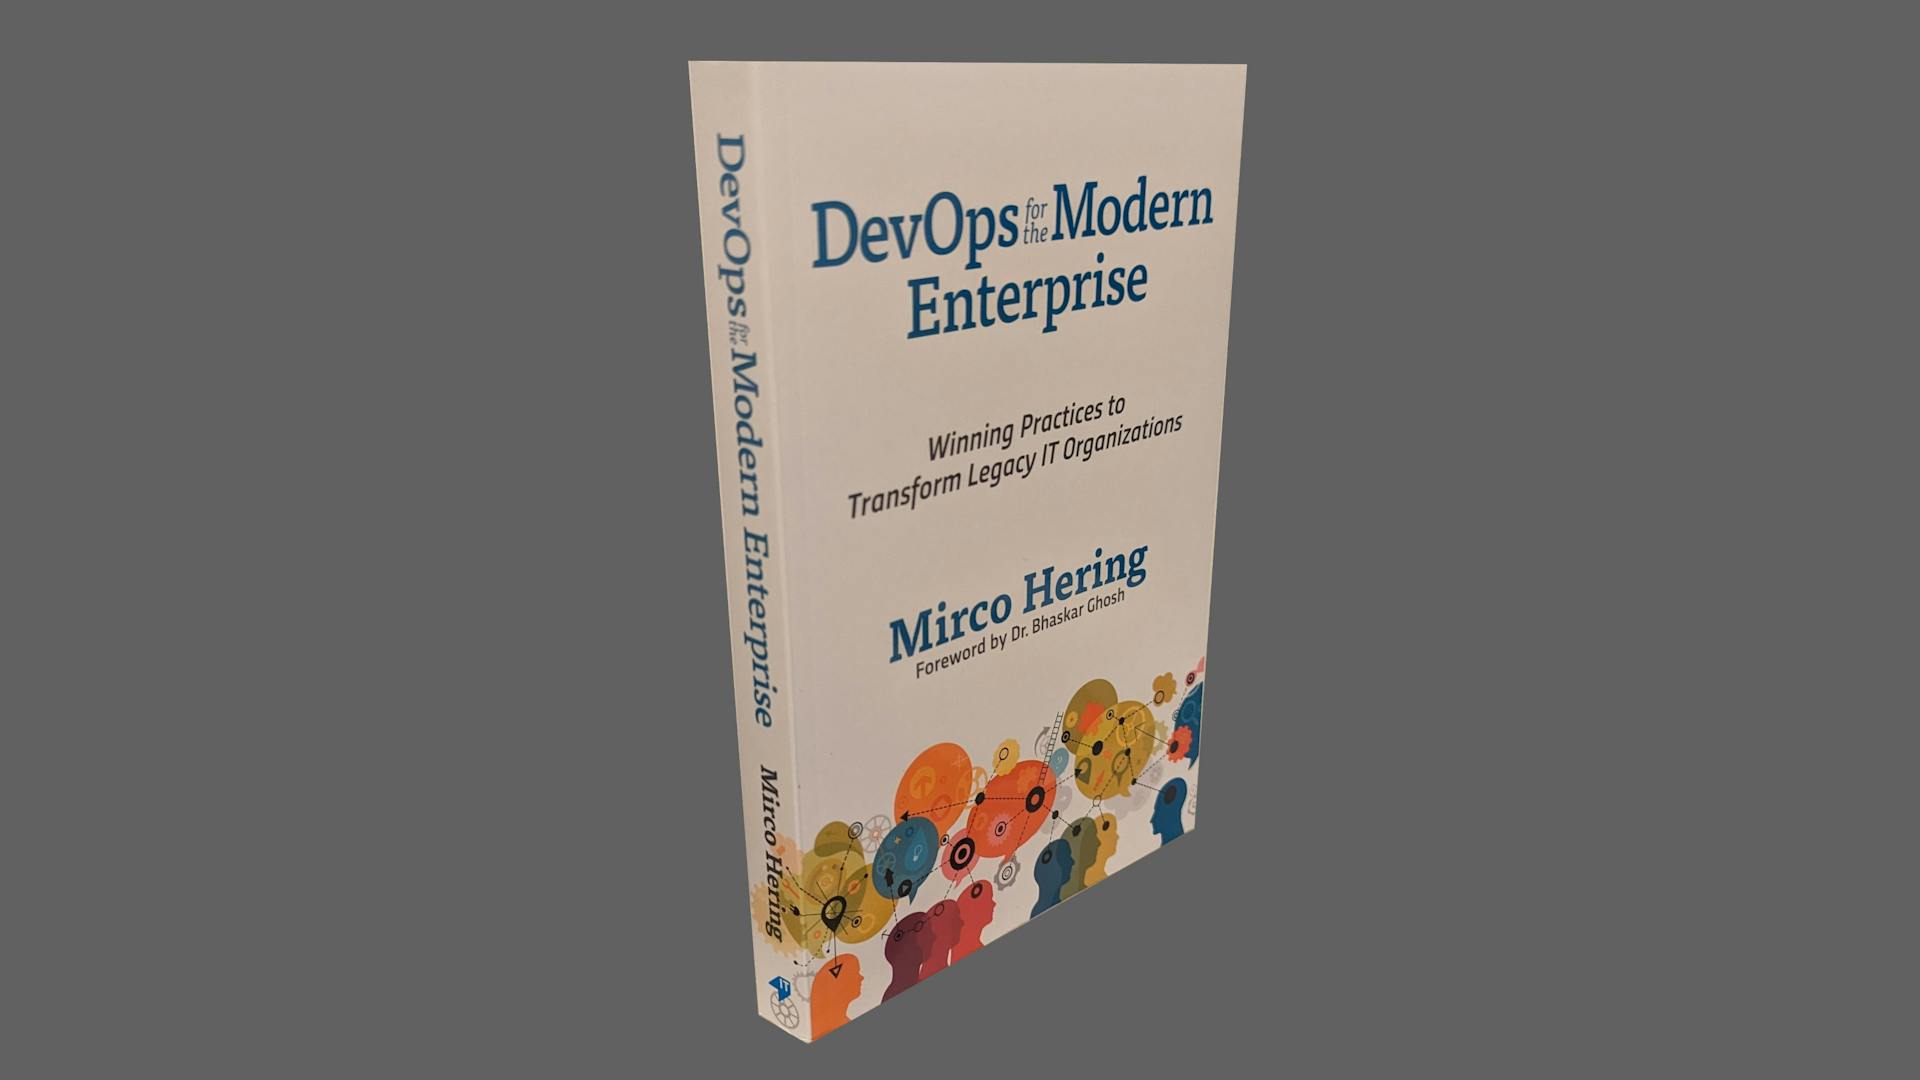 Book: DevOps for the Modern Enterprise. Winning Practices to Transform Legacy IT Organizations.